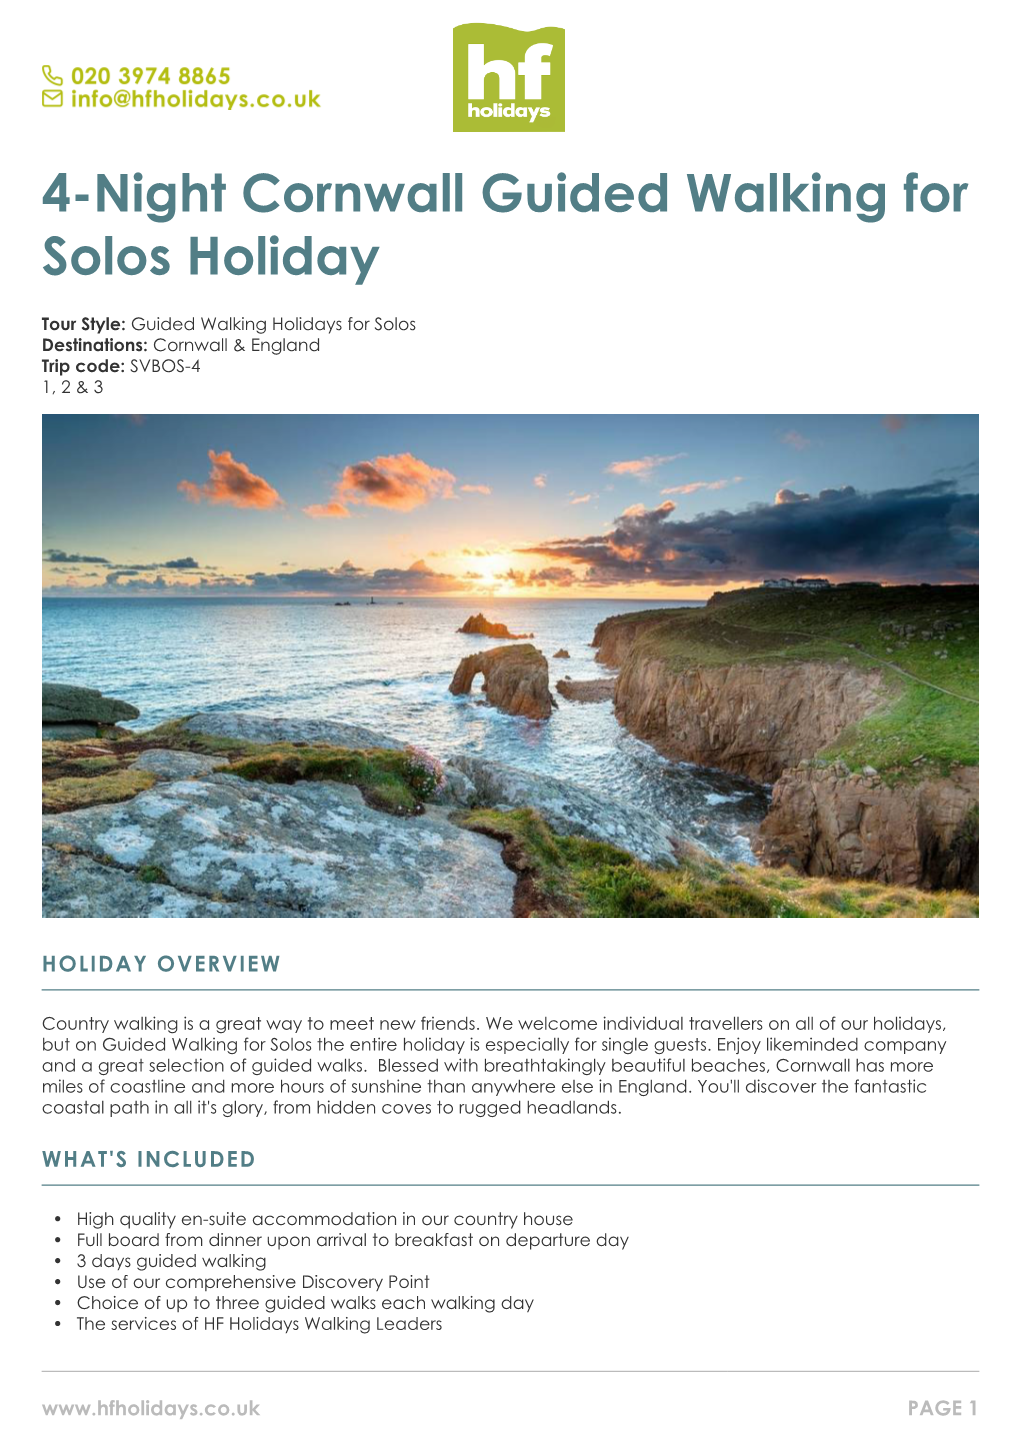 4-Night Cornwall Guided Walking for Solos Holiday